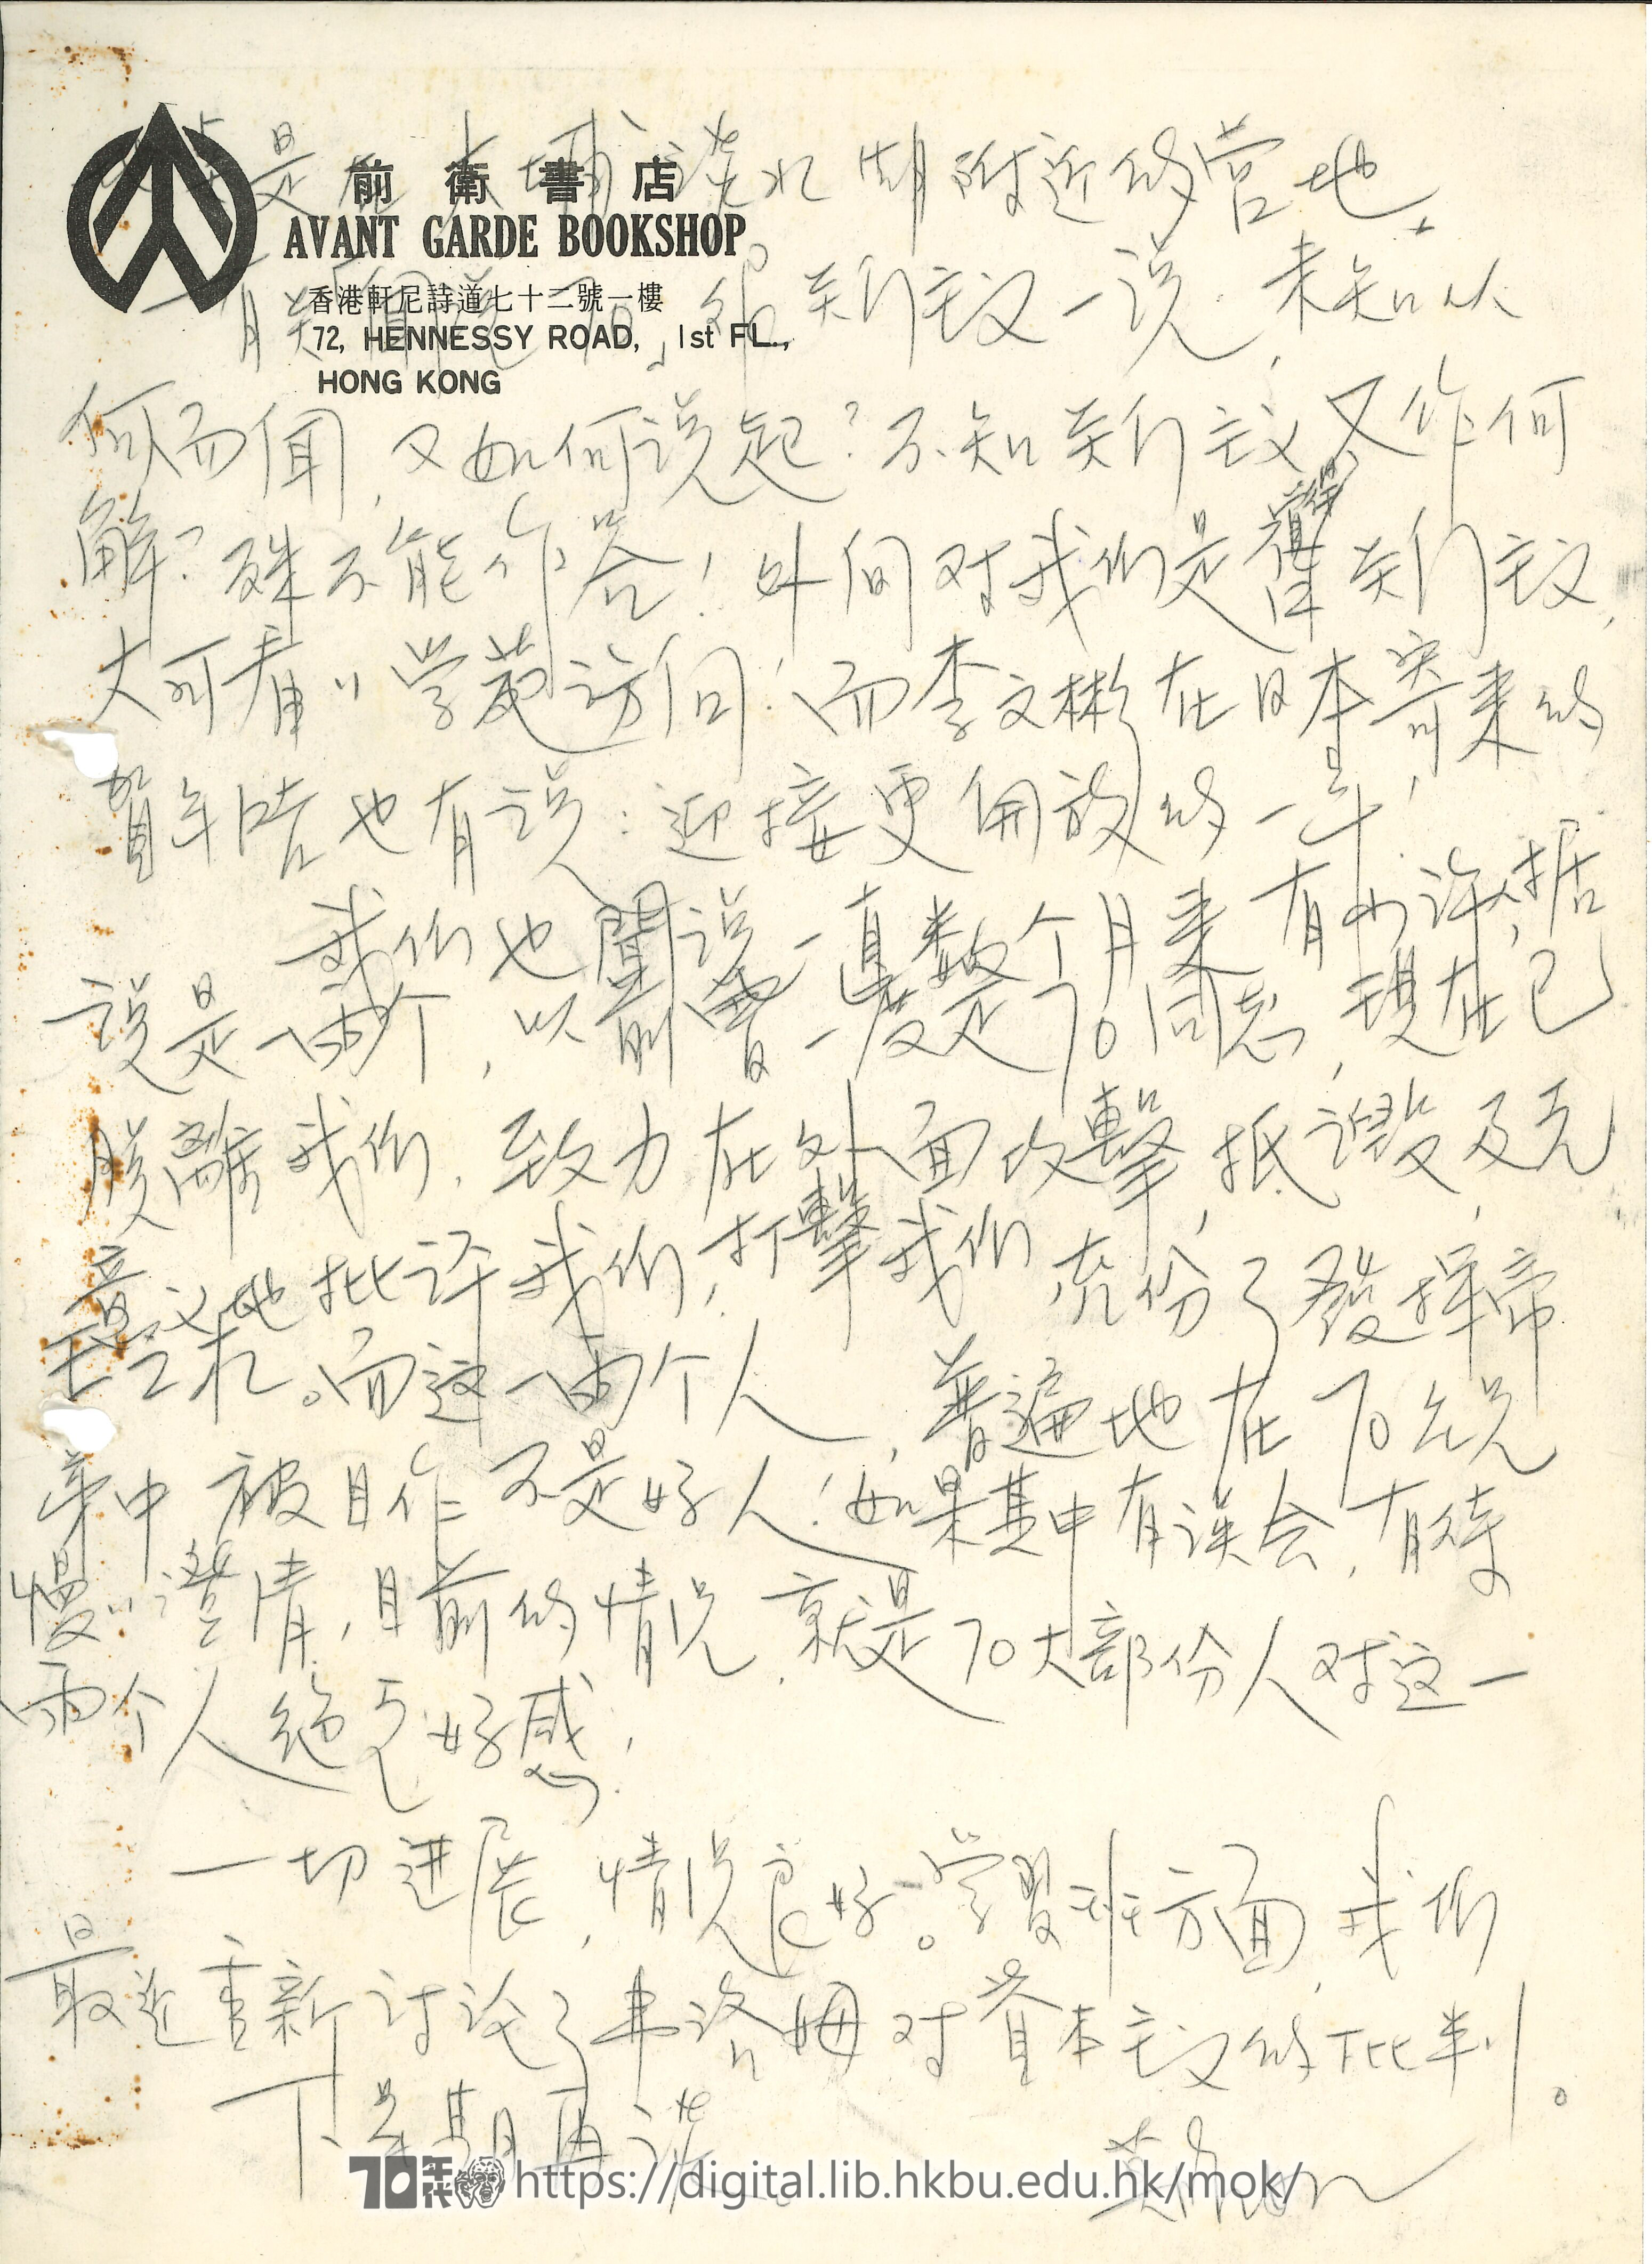   Letter from Mok Chiu Yu about the exclusive nature of their group MOK, Chiu Yu 